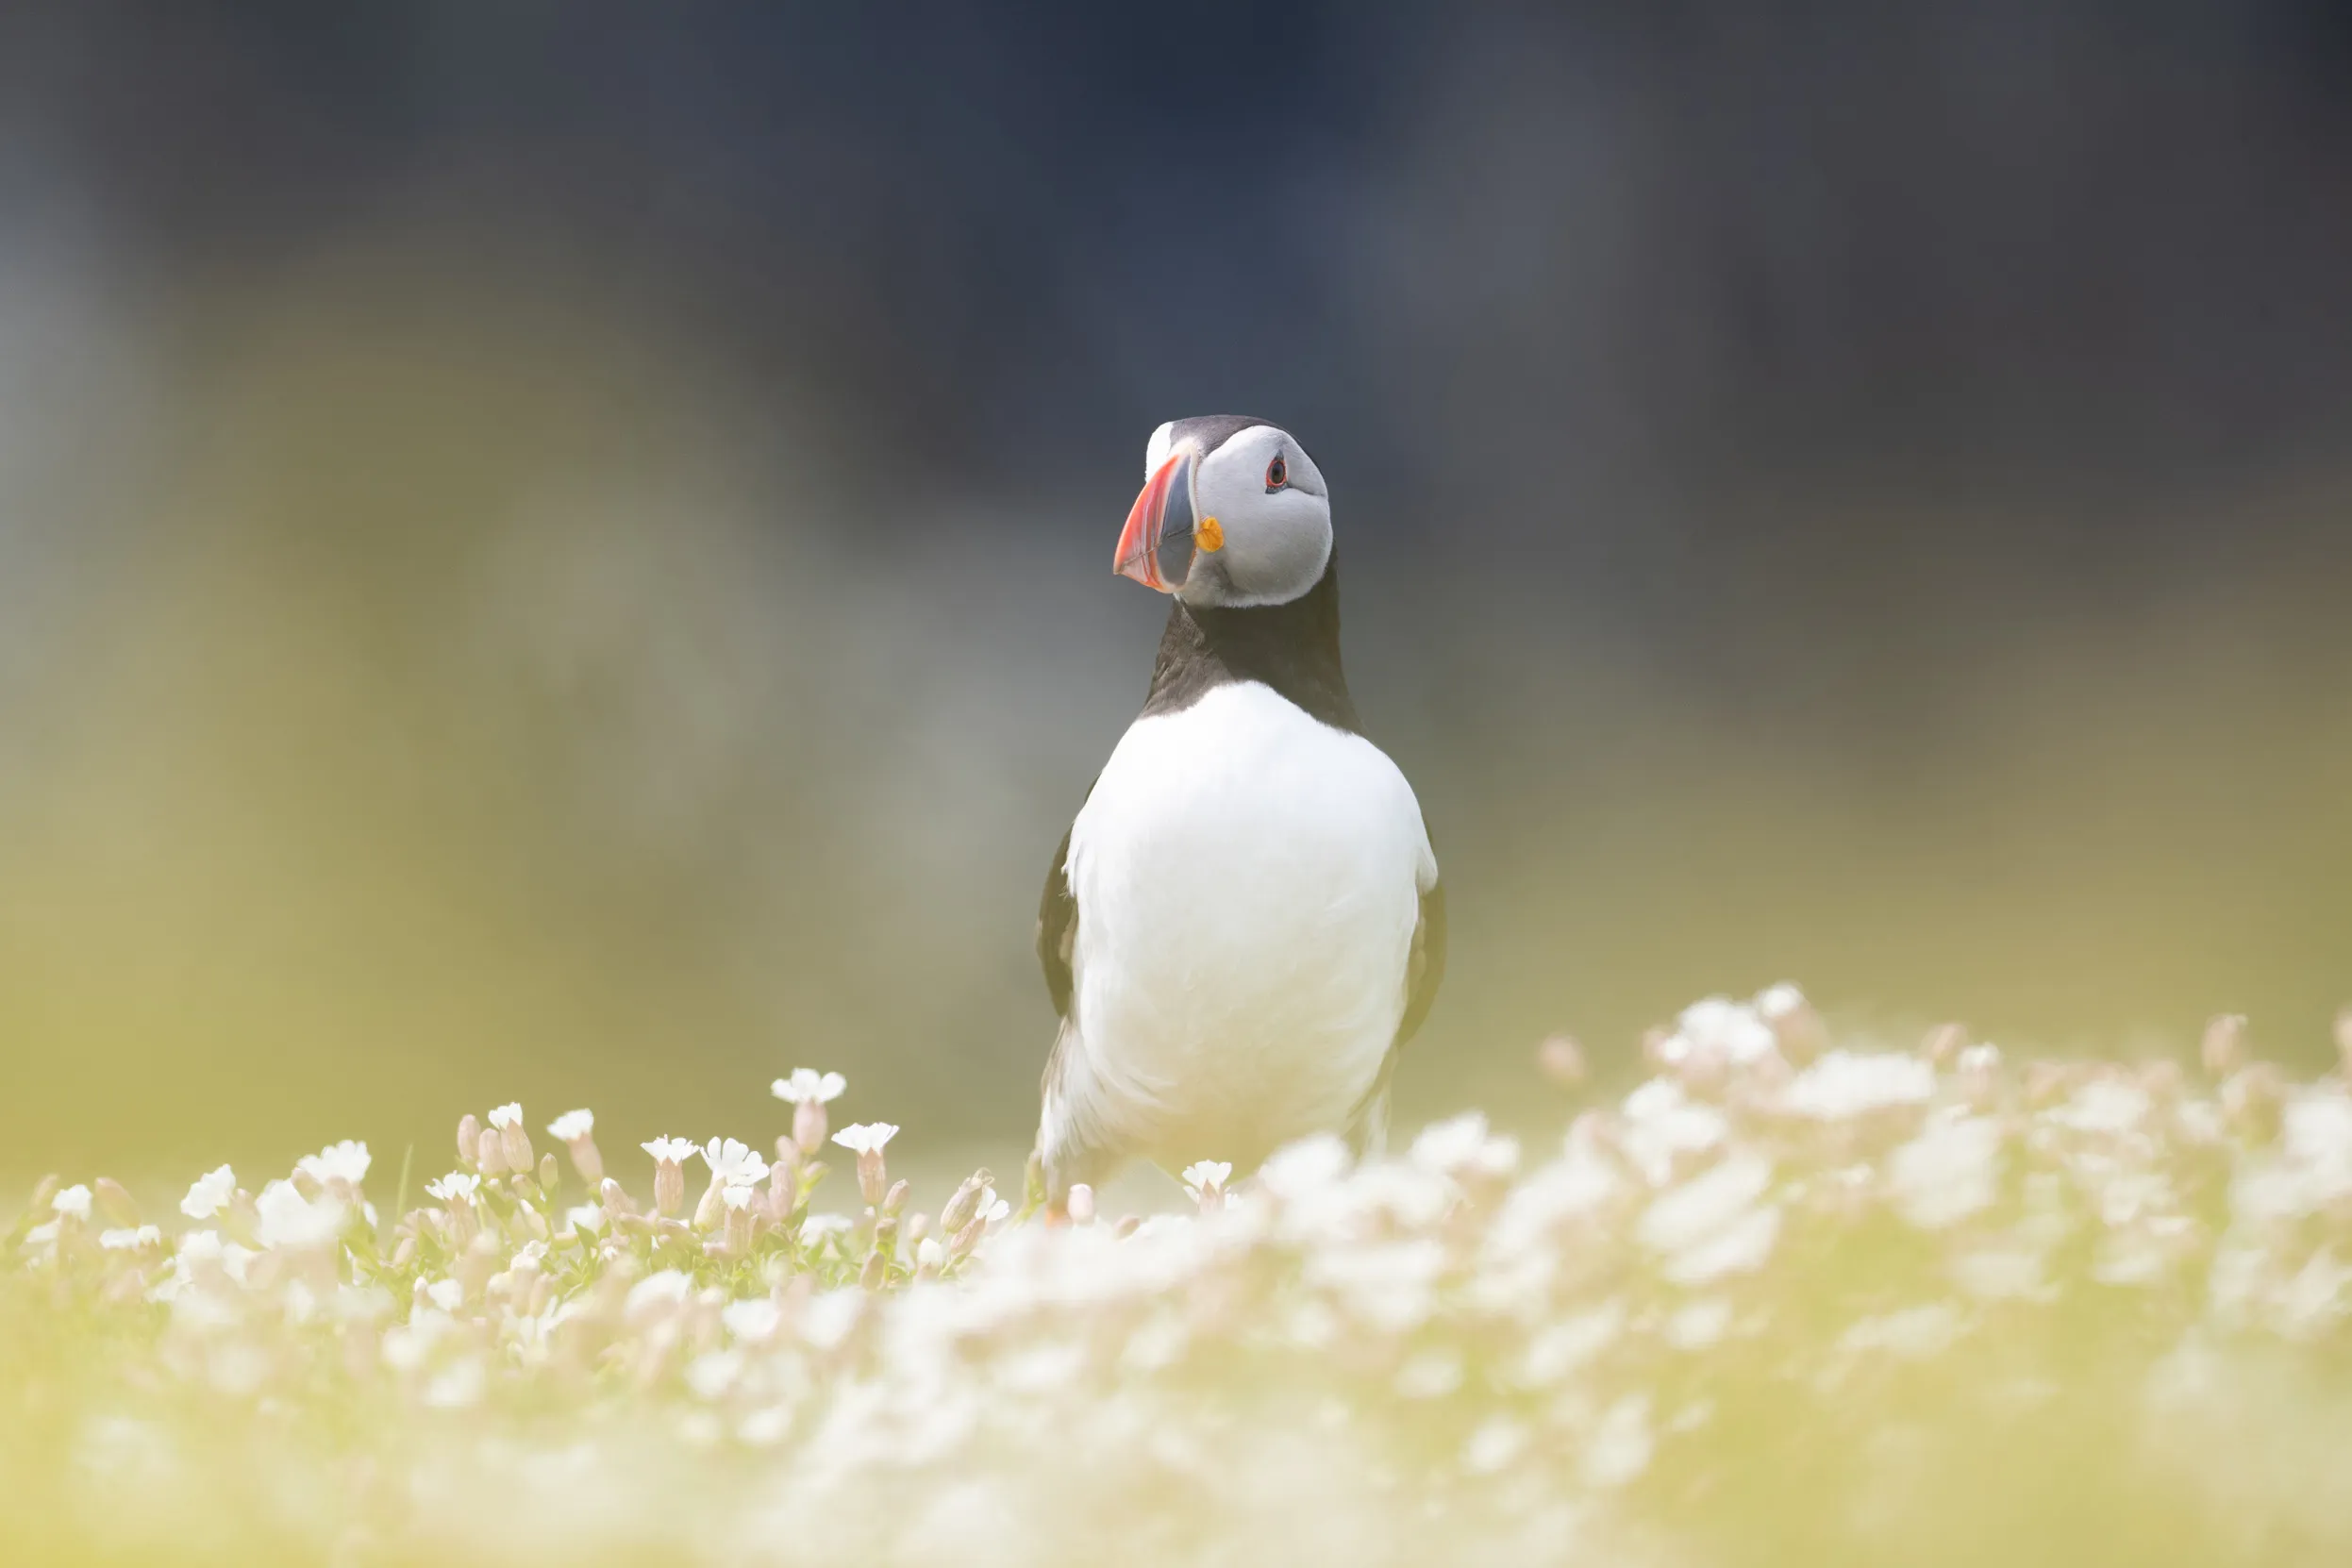 A Puffin stood proudly on a field of white flowers.